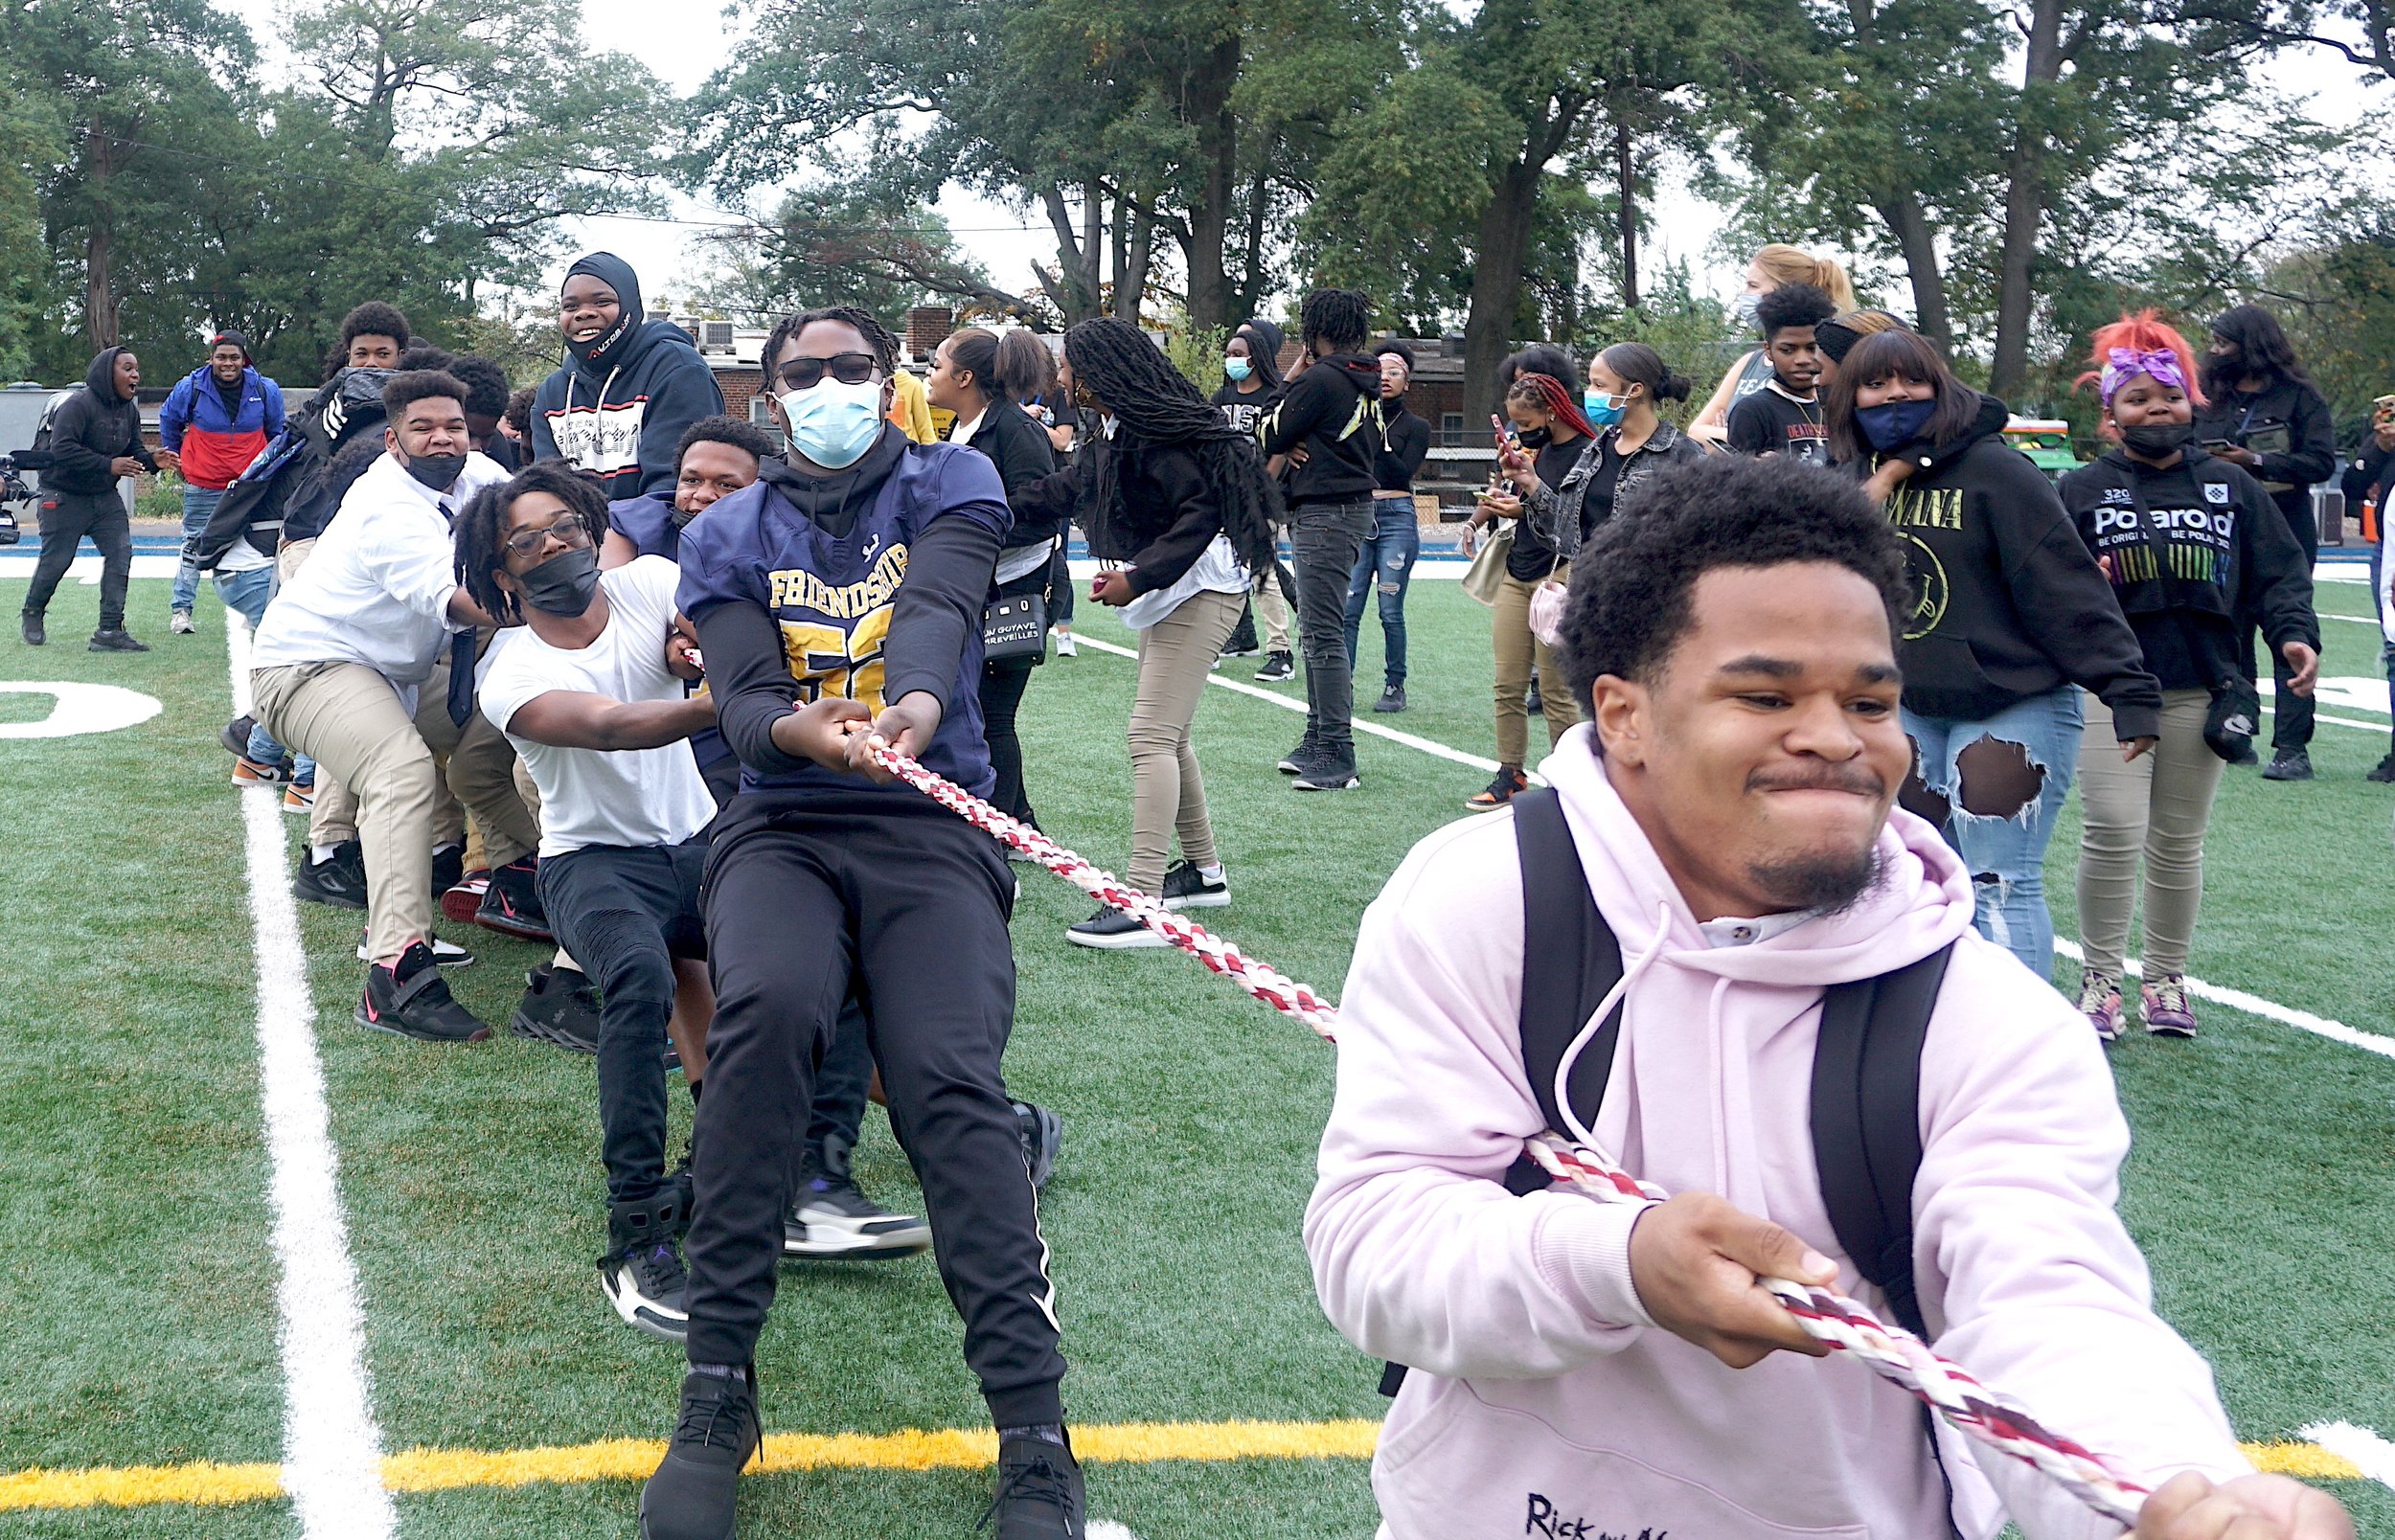 FCA scholars take to the field in an epic tug of war.